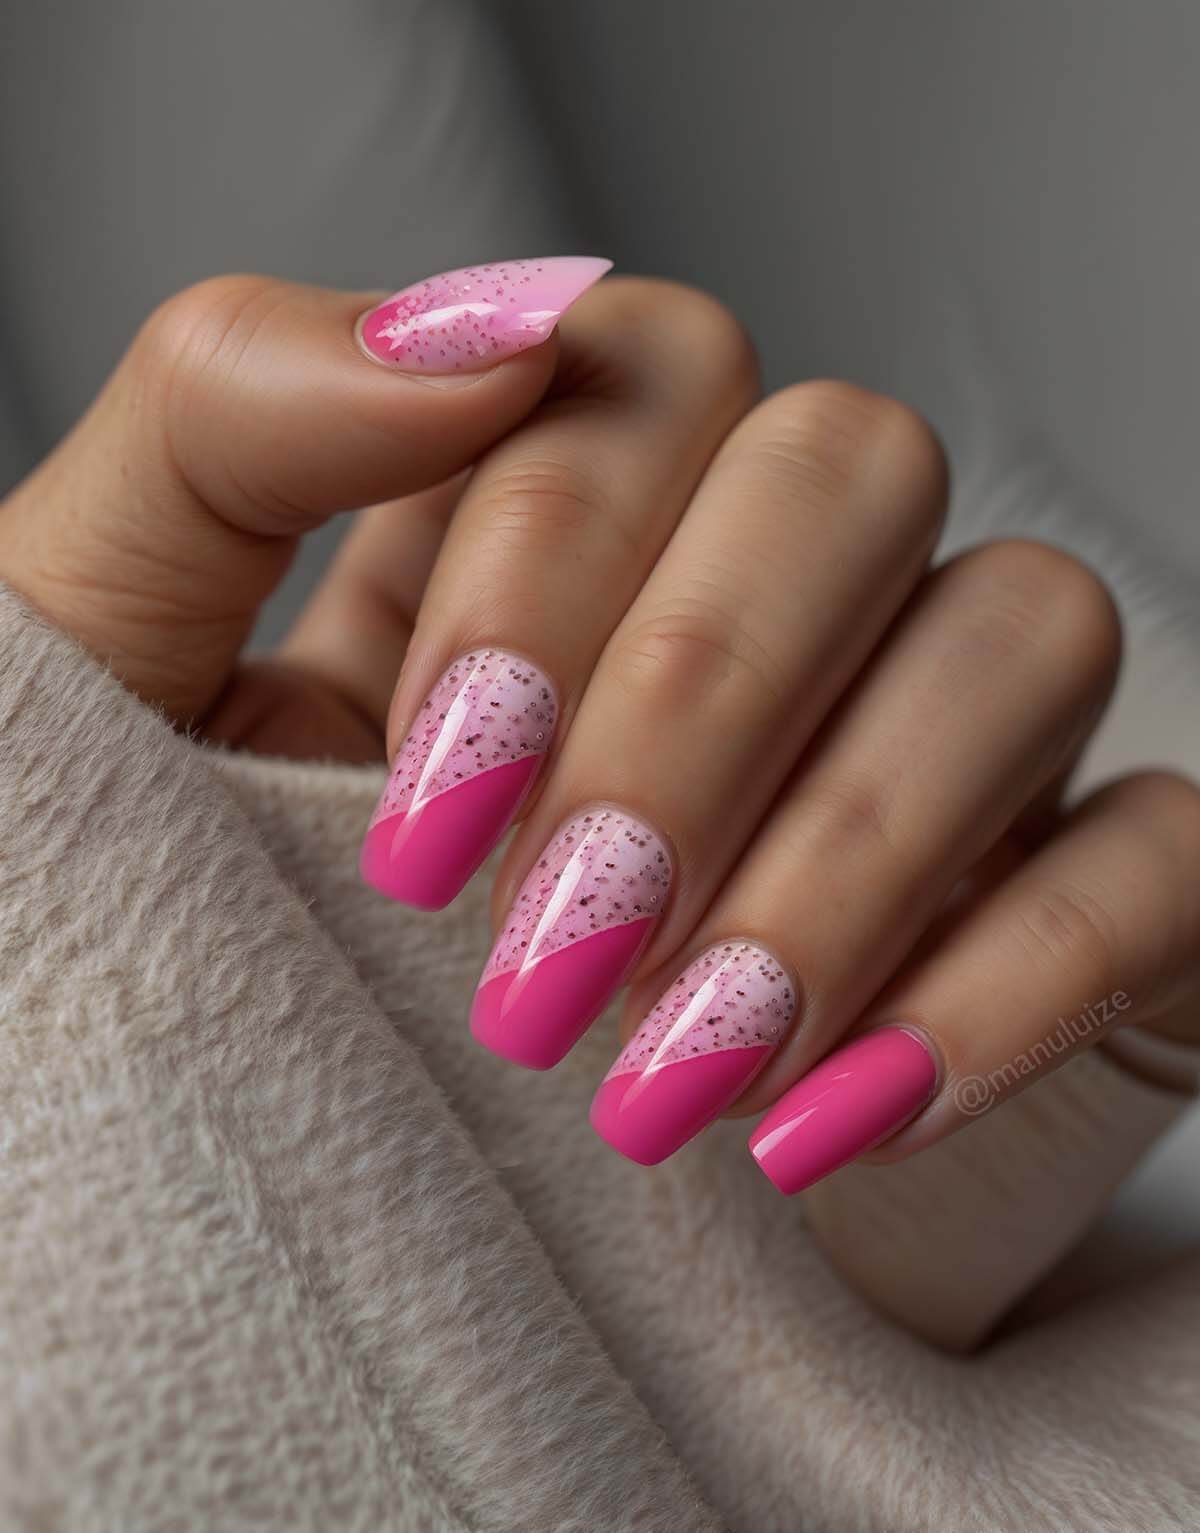 Pink summer nail art with glitter